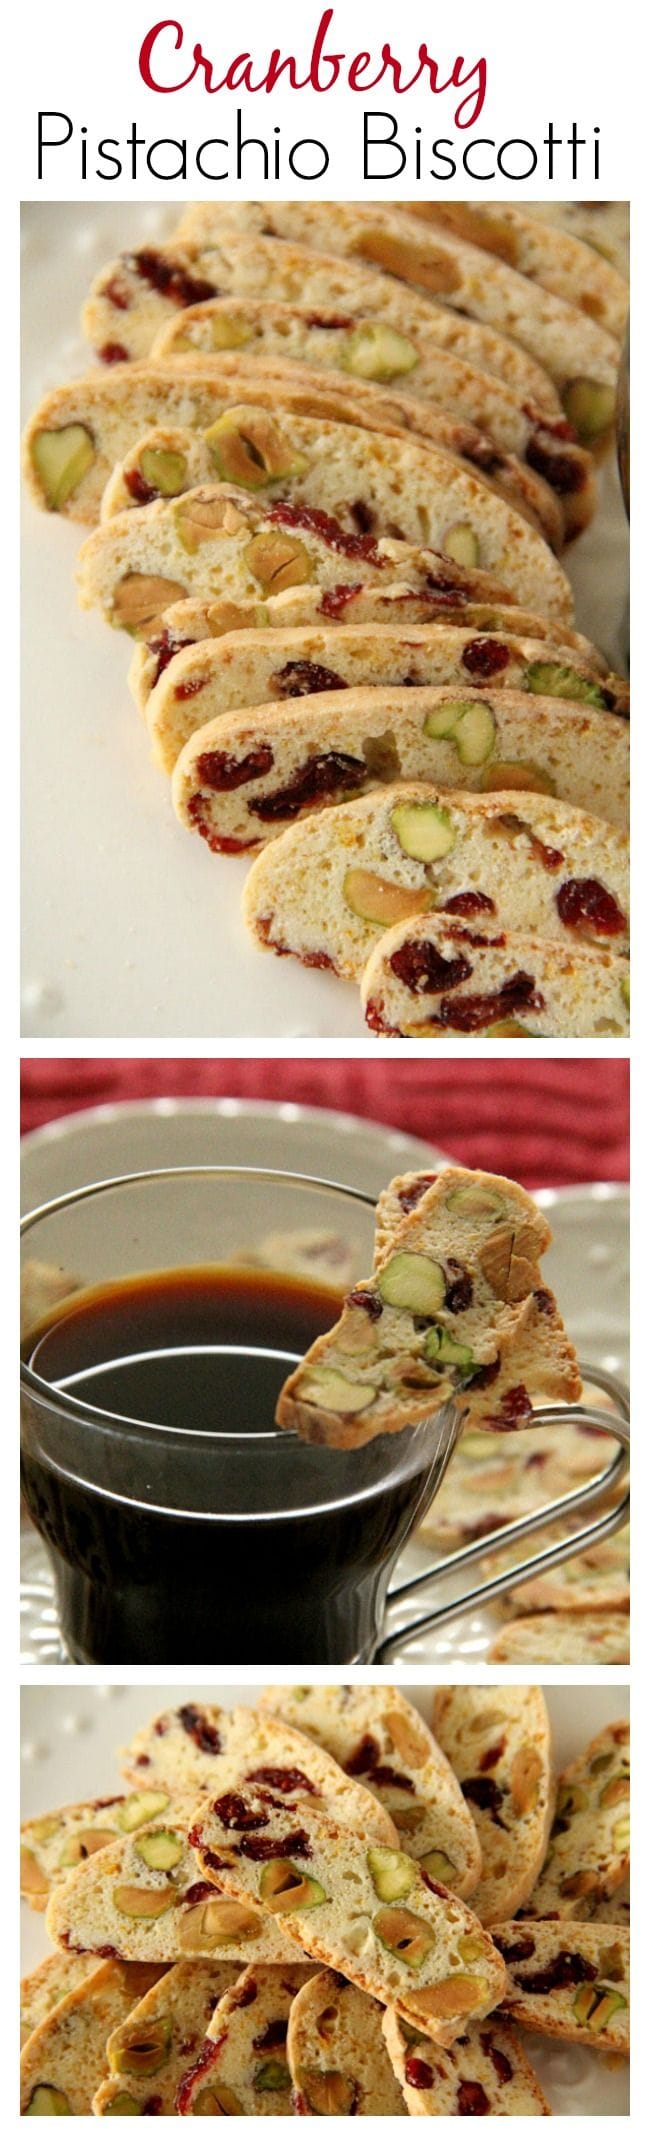 Cranberry and Pistachio Biscotti – crunchy and amazing biscotti loaded with cranberry and pistachio. Easy recipe that you can make at home this holiday season | rasamalaysia.com